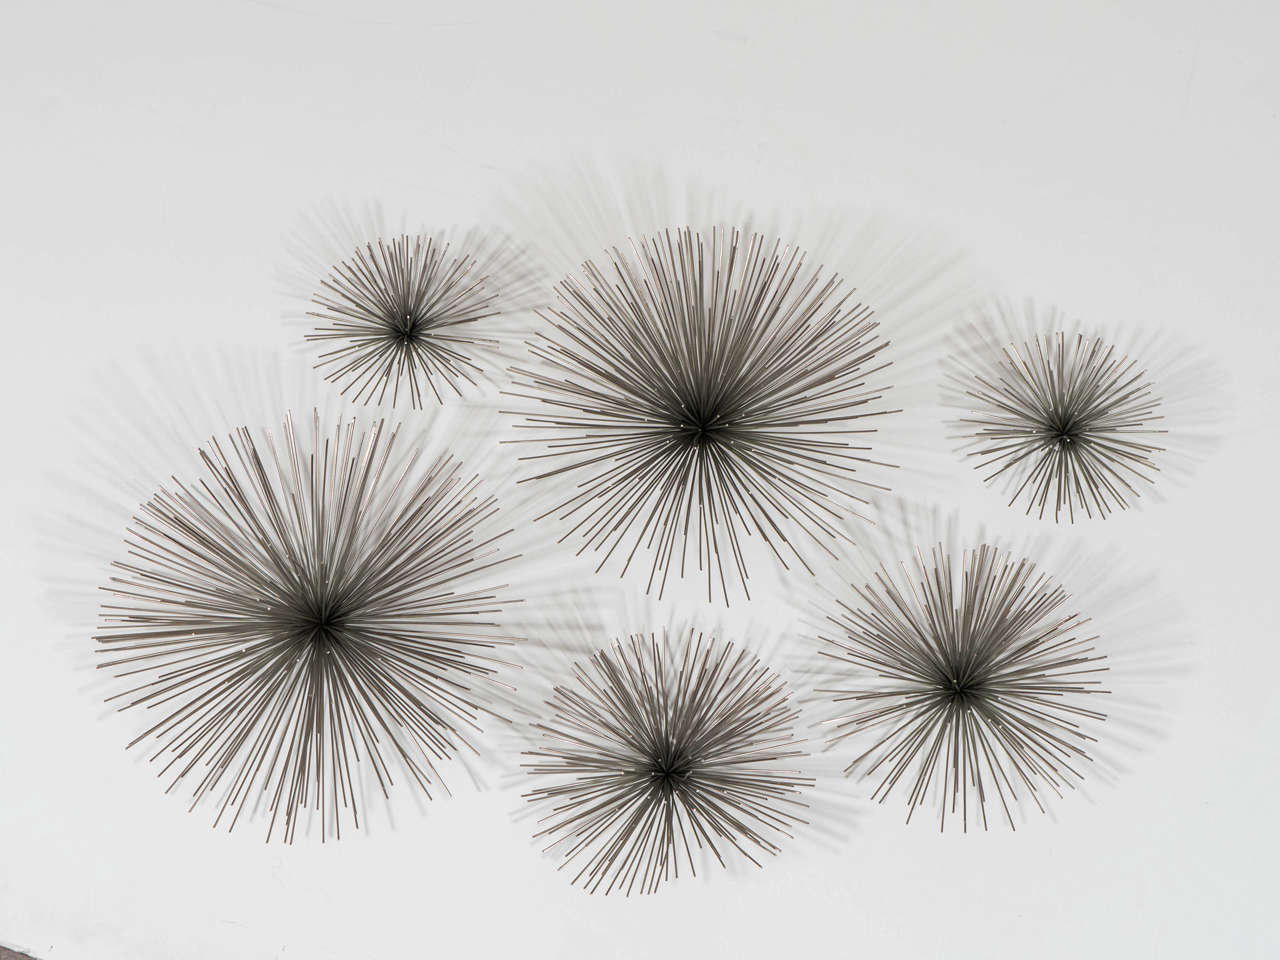 A set of six chrome modernistic spike clusters or pom poms in various sizes, which form a wall sculpture by Curtis Jeré. 

Dimensions: Large 6